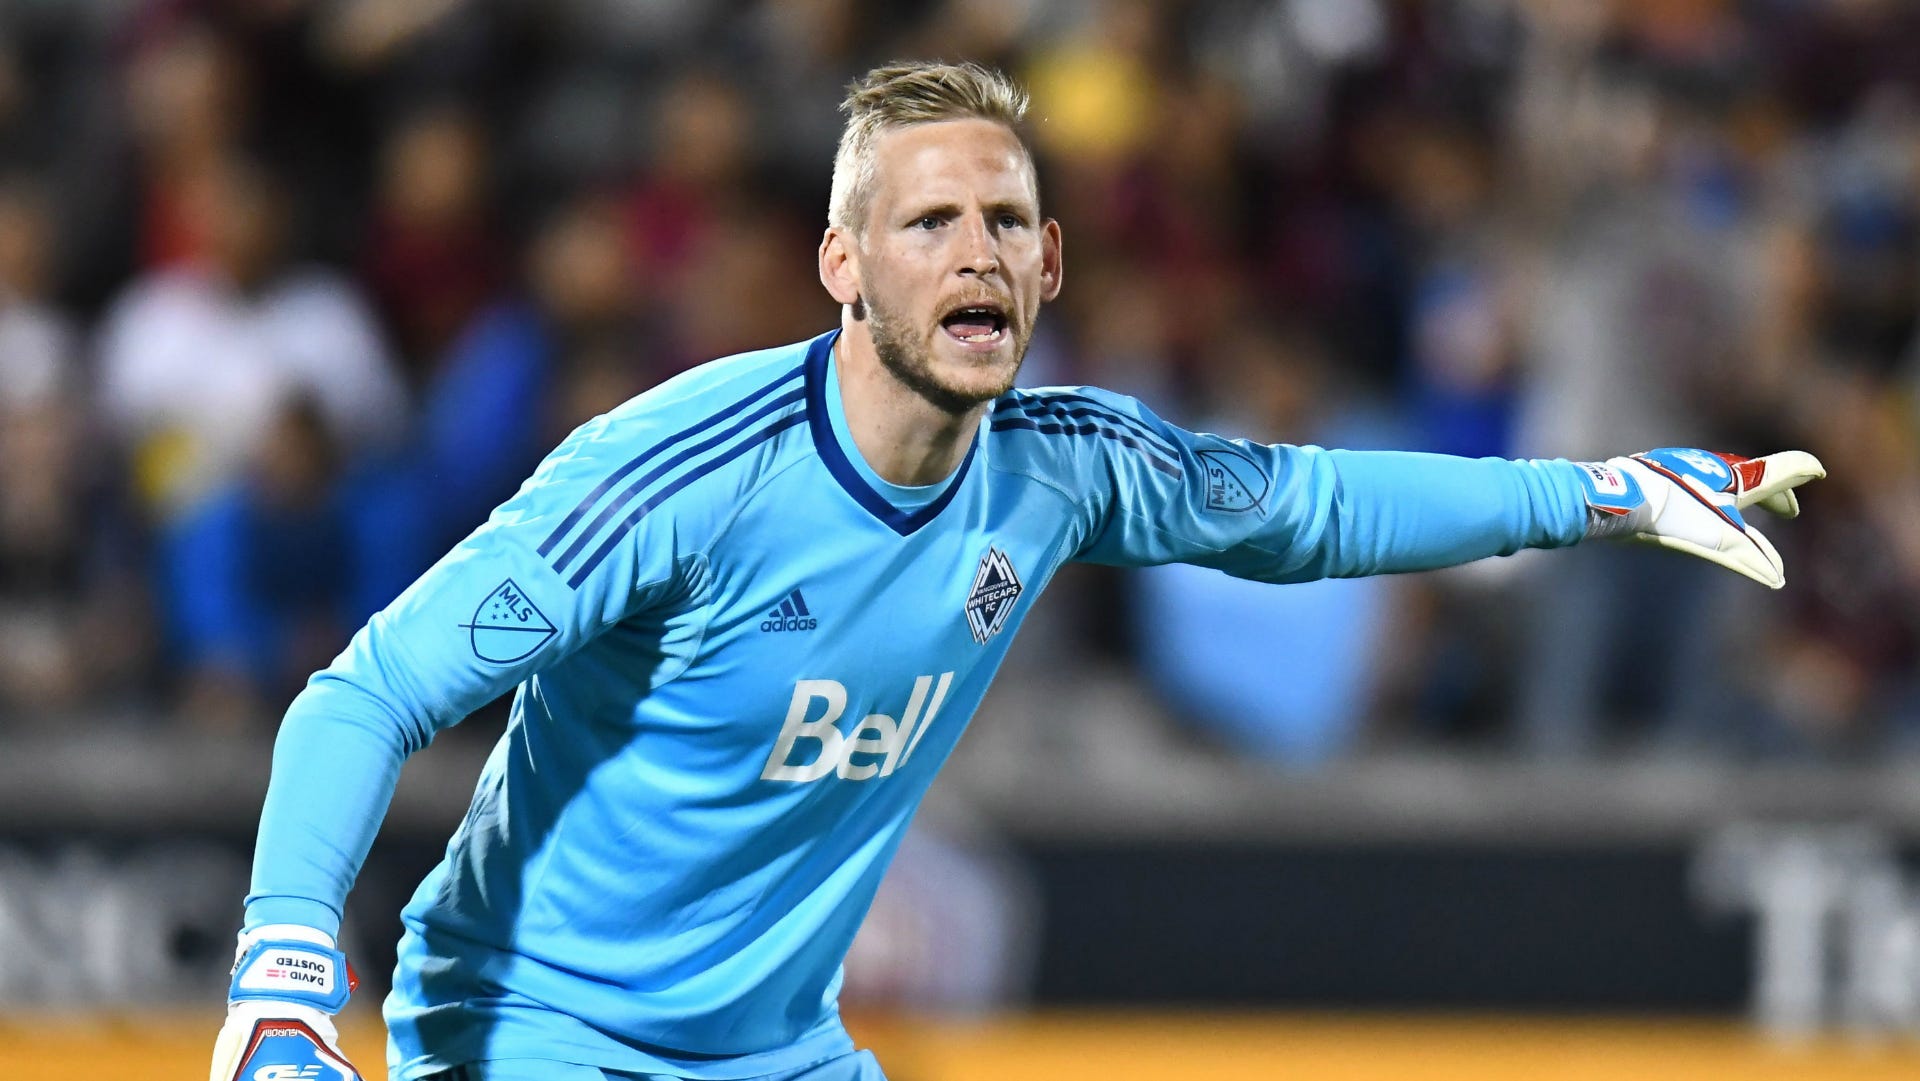 Vancouver news: Vancouver Whitecaps sign Japanese goalkeeper